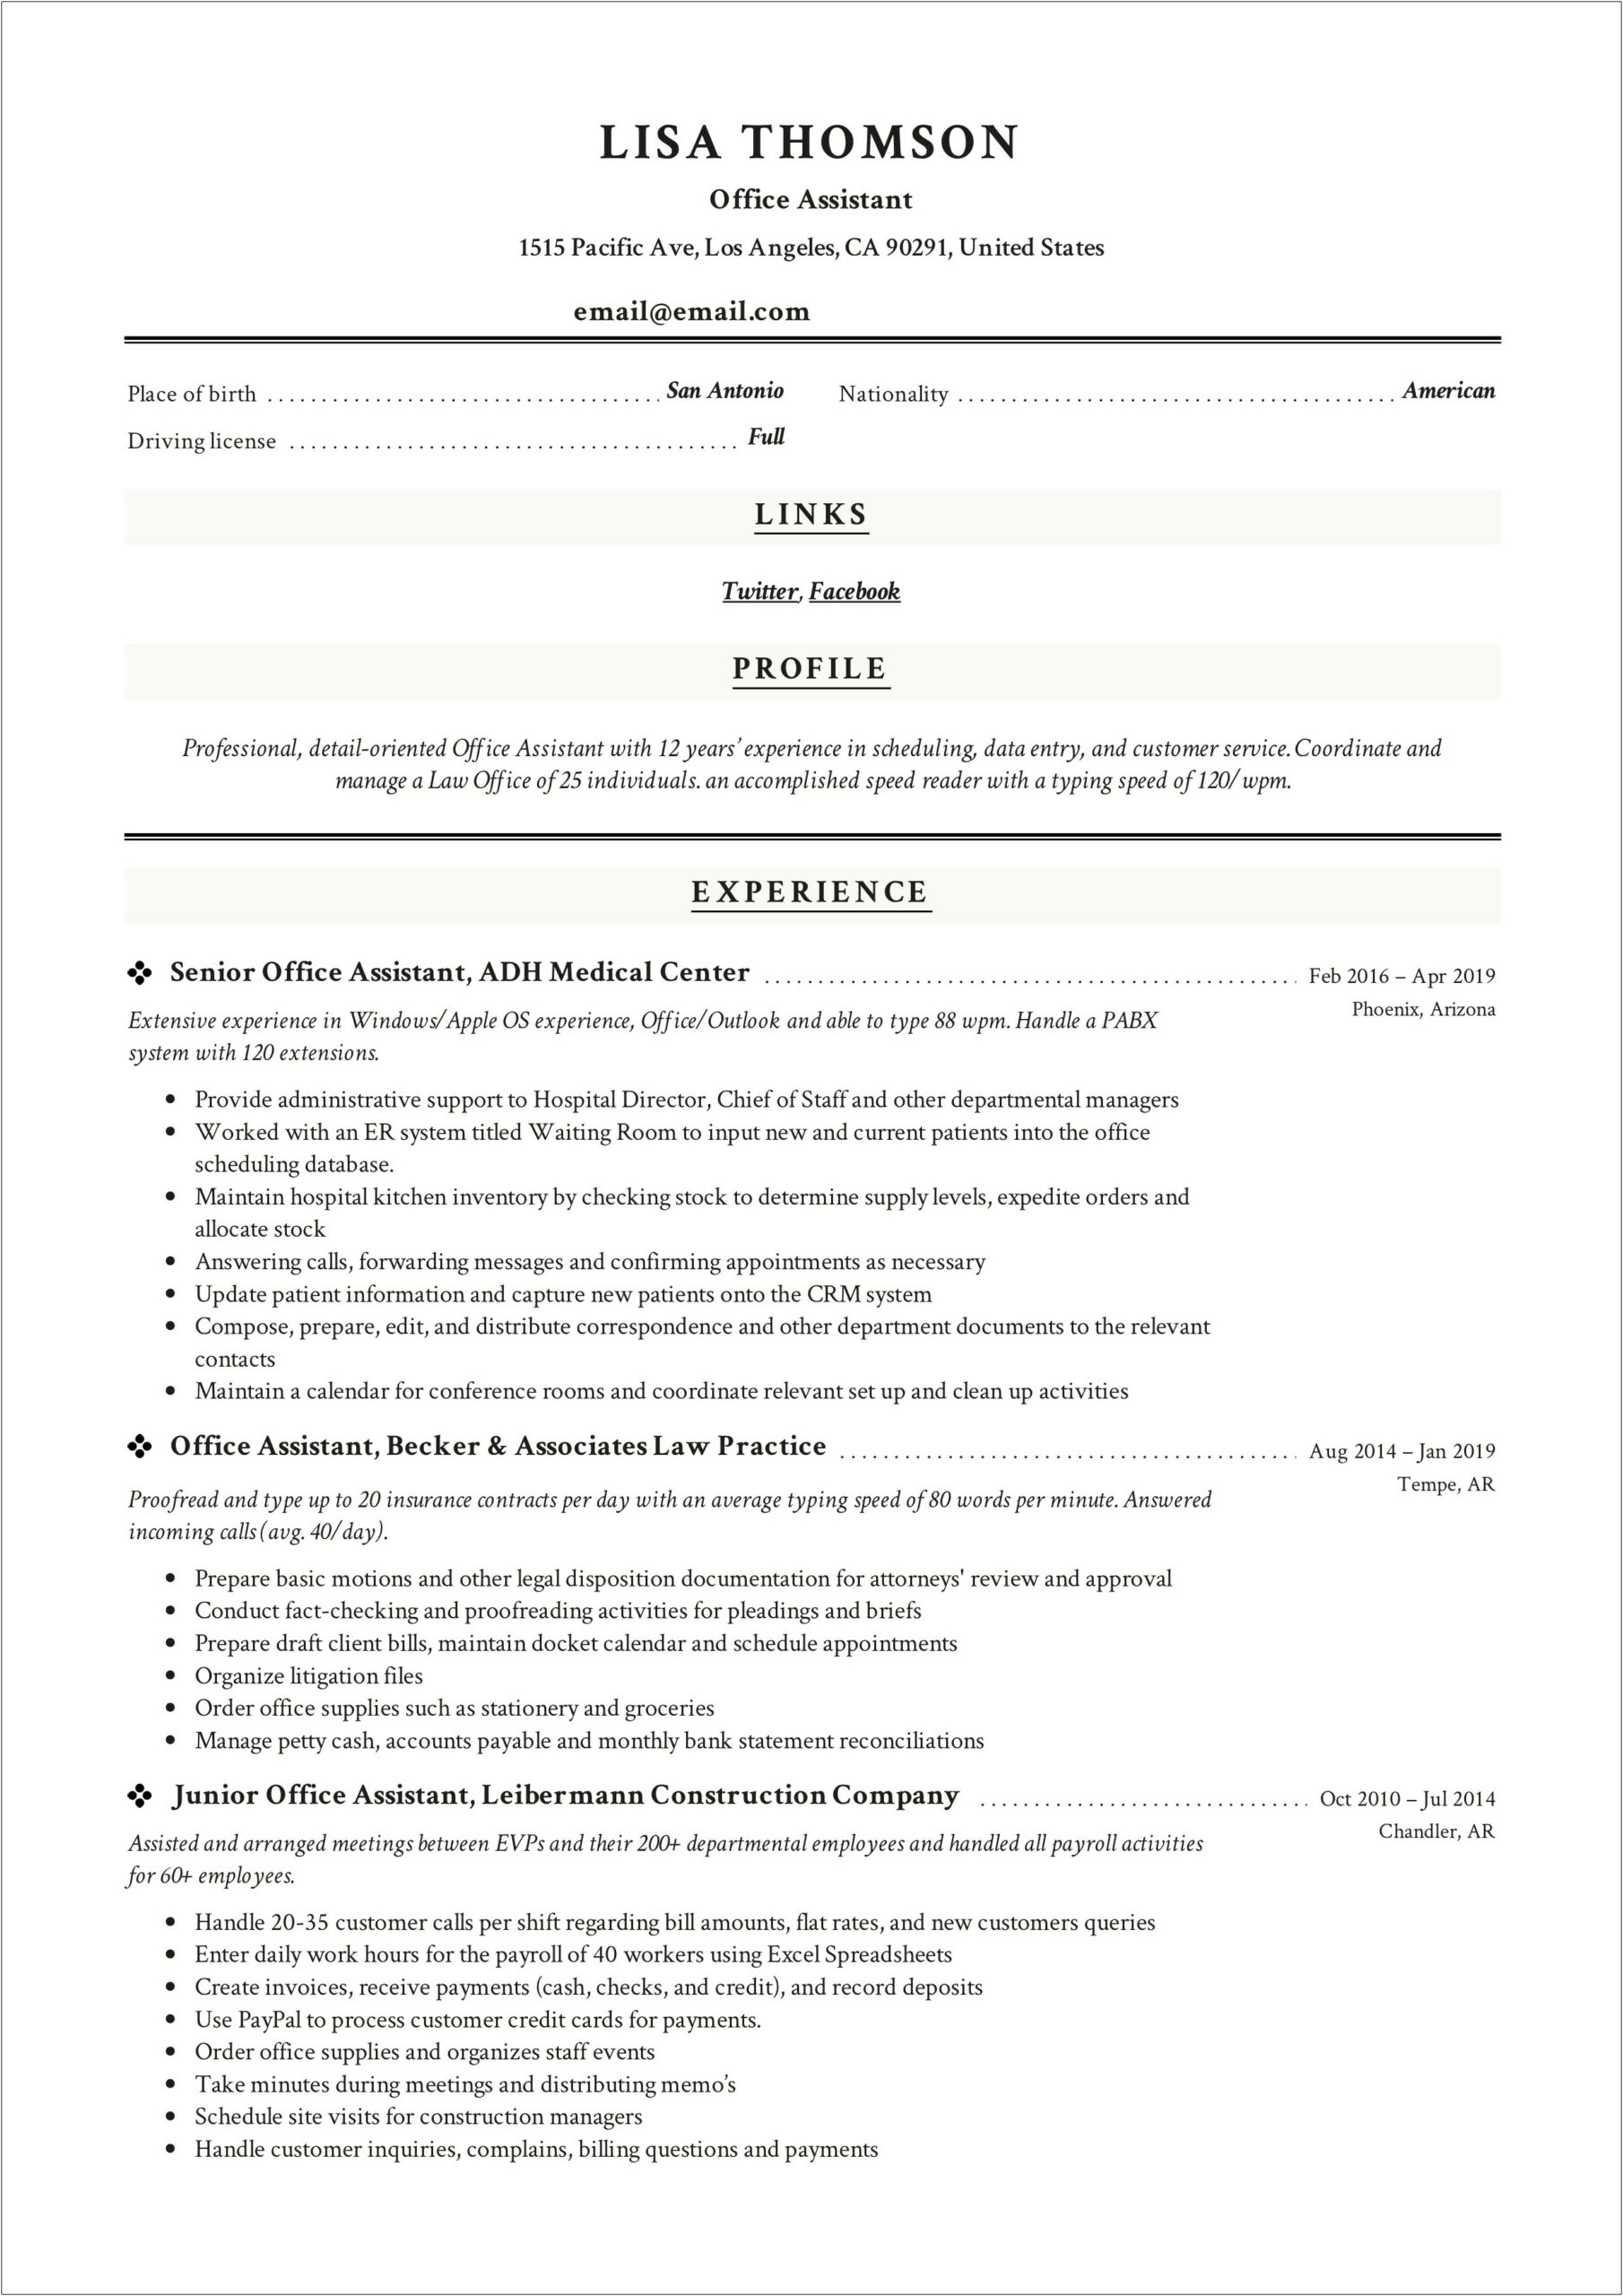 Mortage Comapny Office Assistant Resume Wording